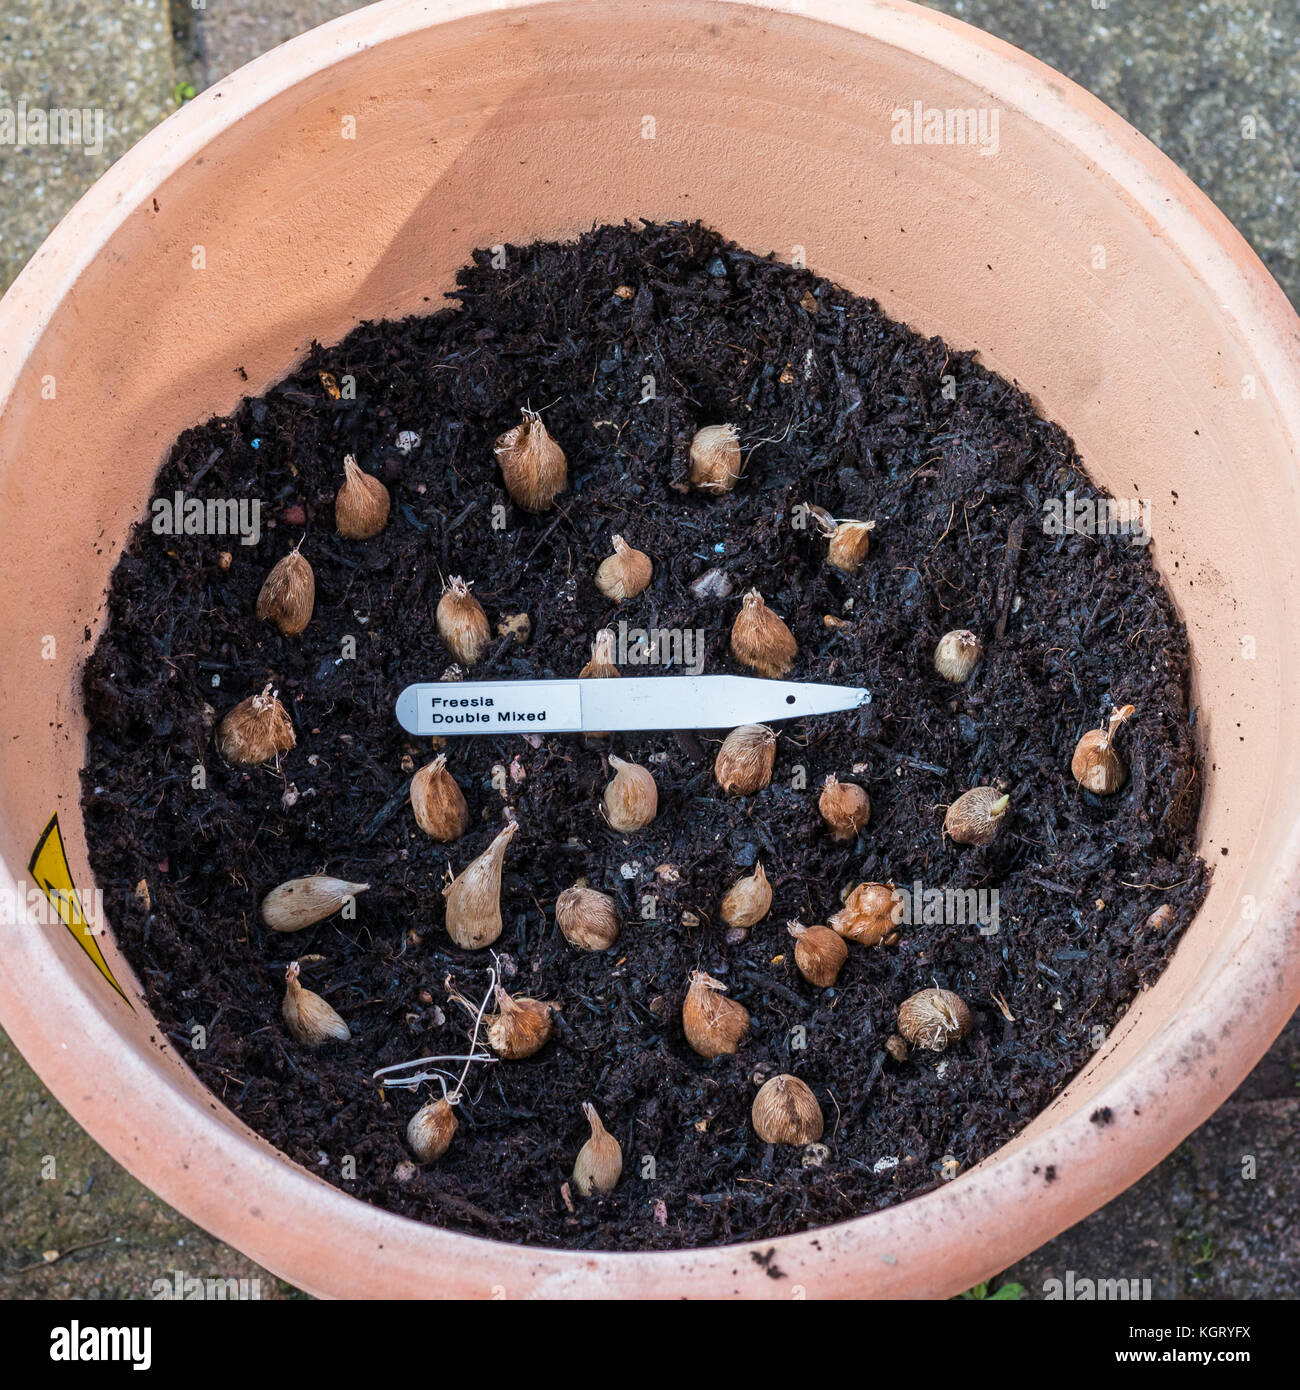 A shot of some freesia bulbs in a plant pot. Stock Photo